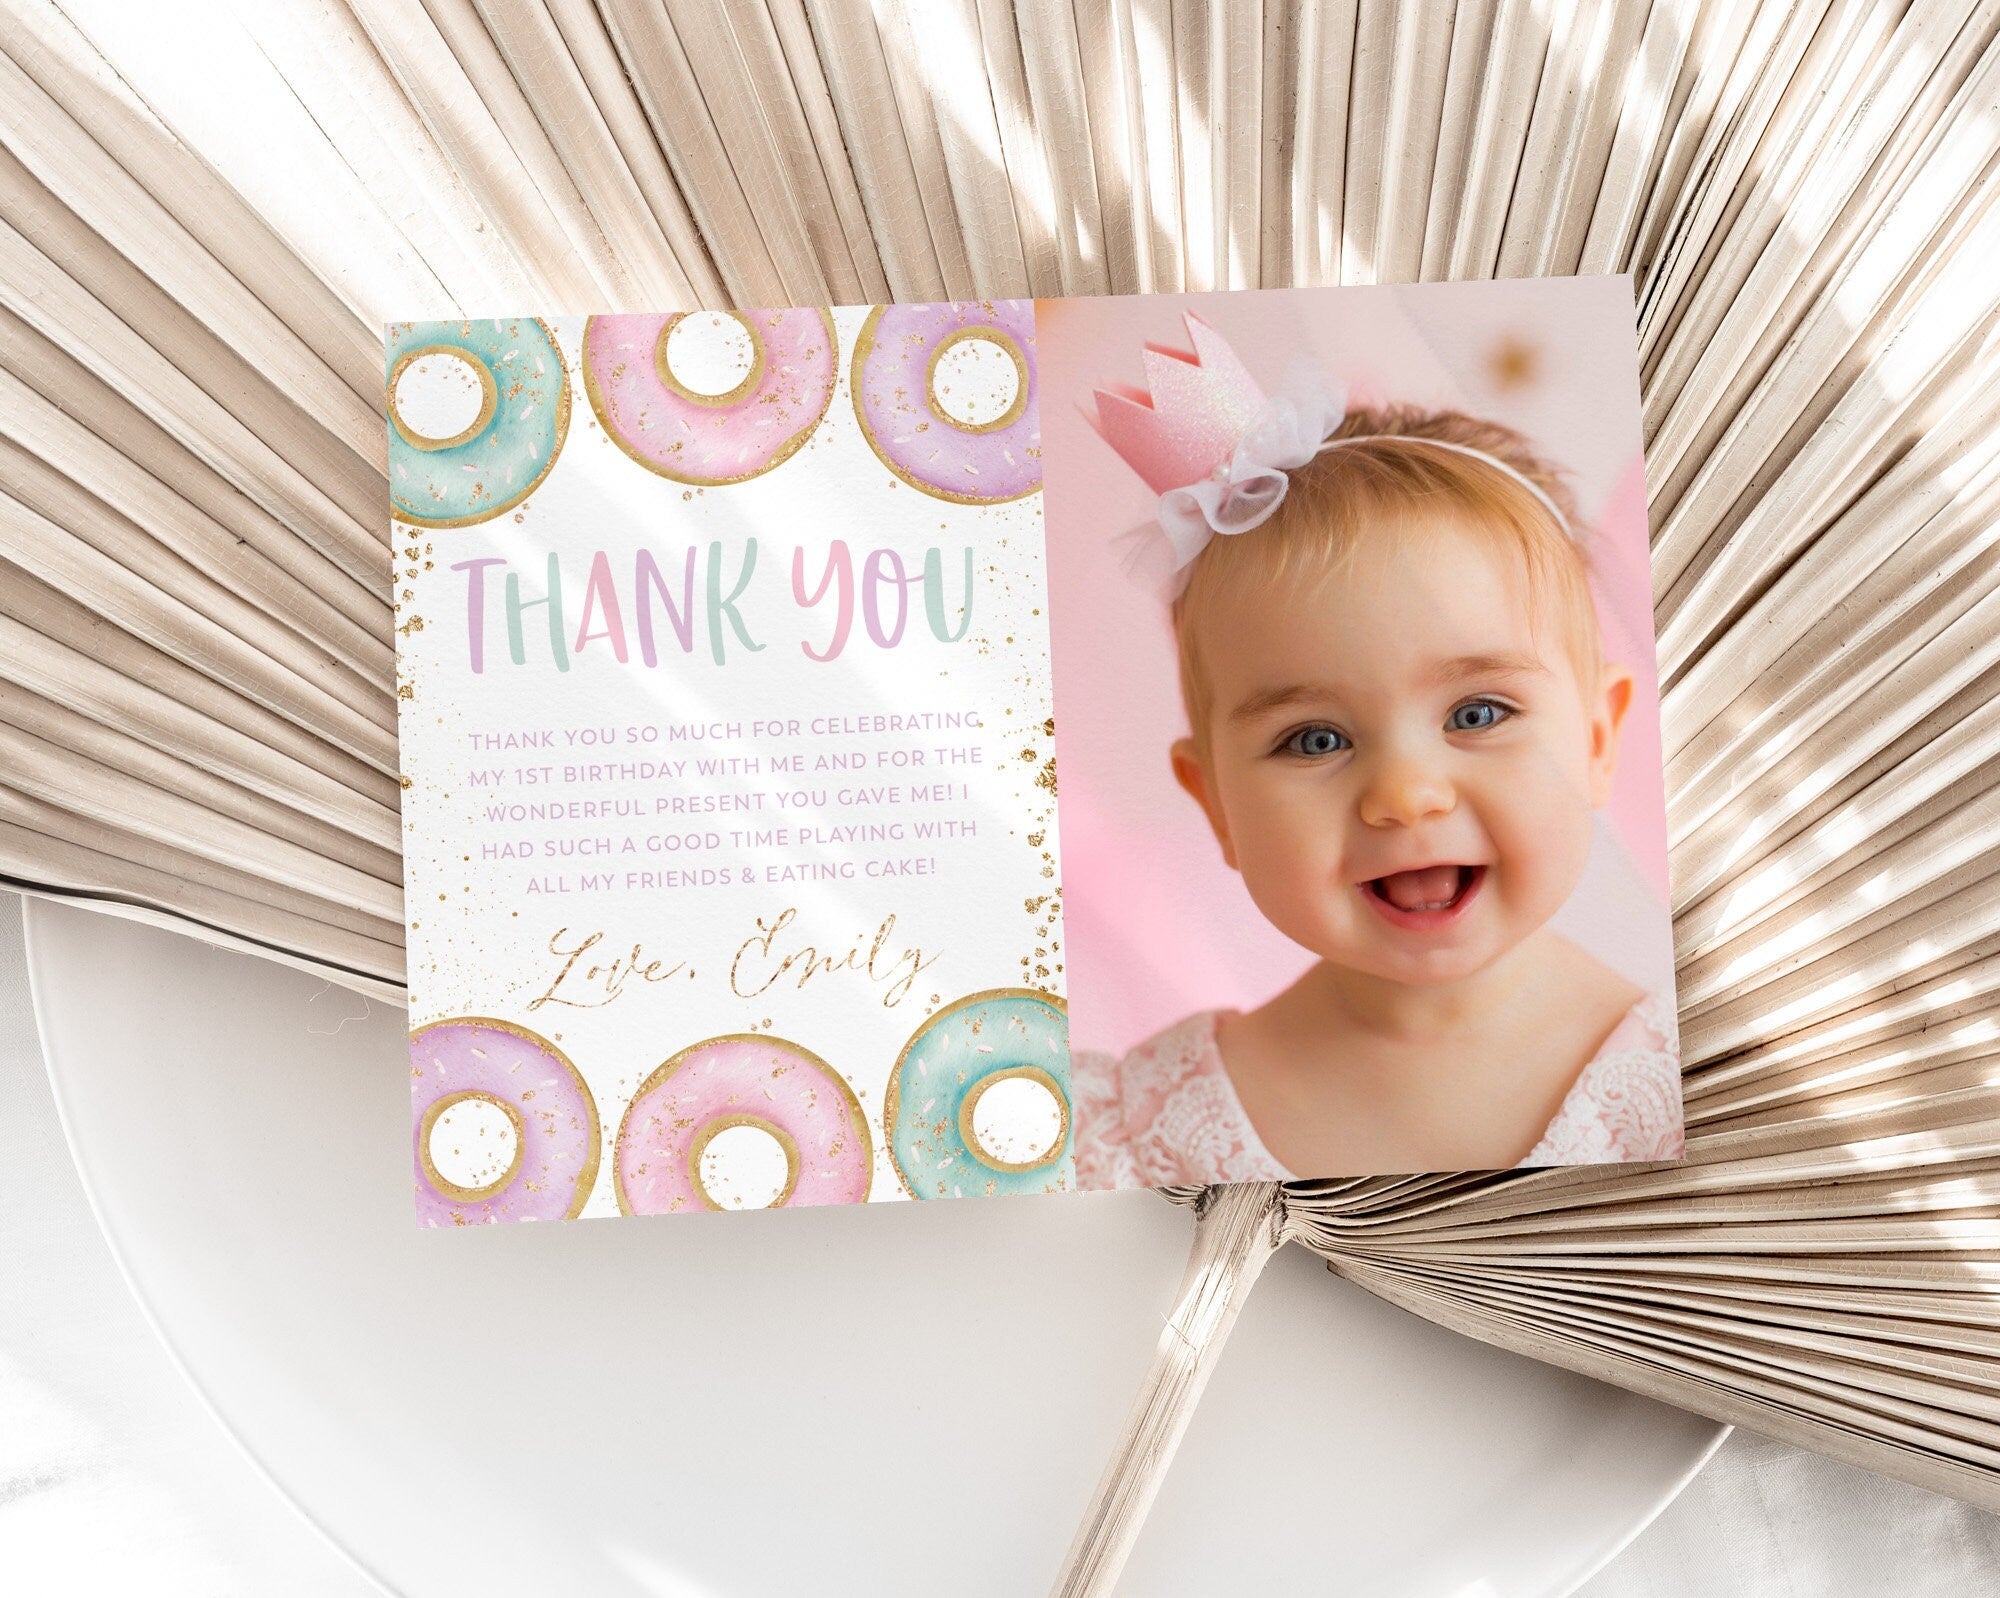 Donut Thank You Card Template, Printable Thank You Card, Donut Birthday Thank You Card Editable Template, Donut Party Thank You Card Pink